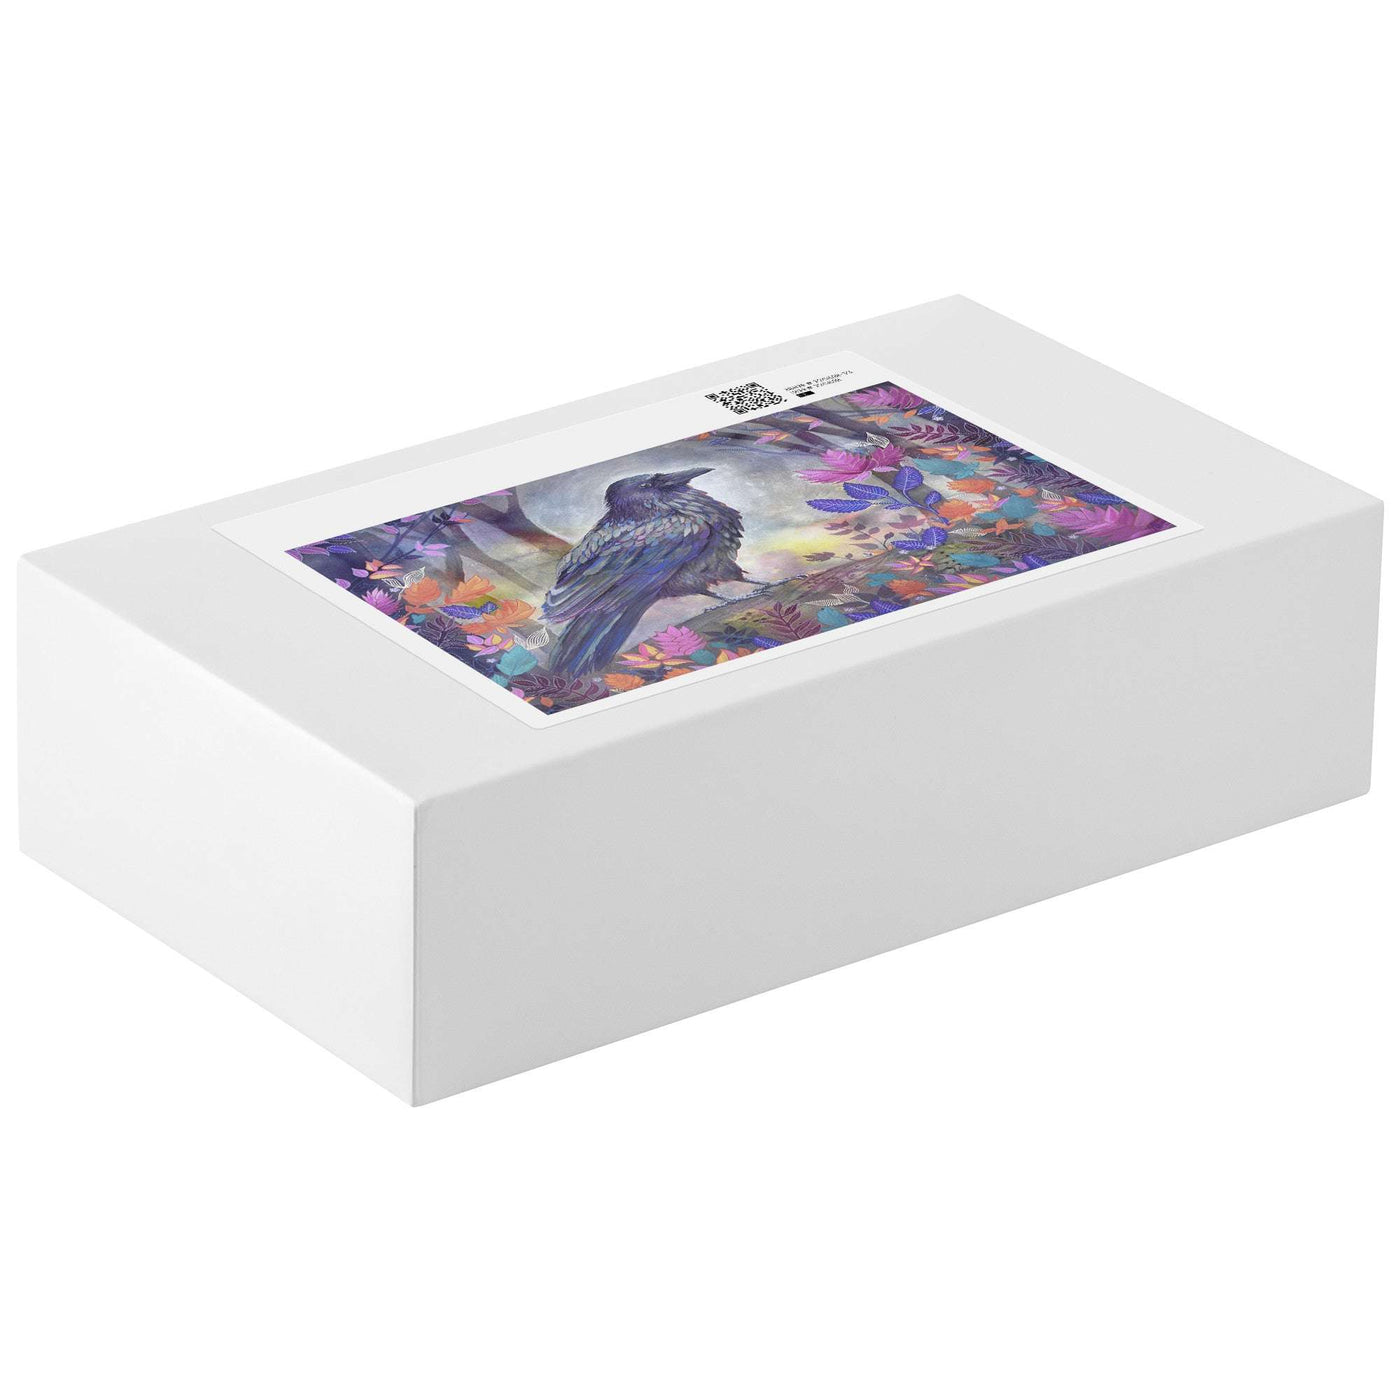 A white Raven Puzzle box showing a vibrant image of a black bird among colorful flowers on it's lid